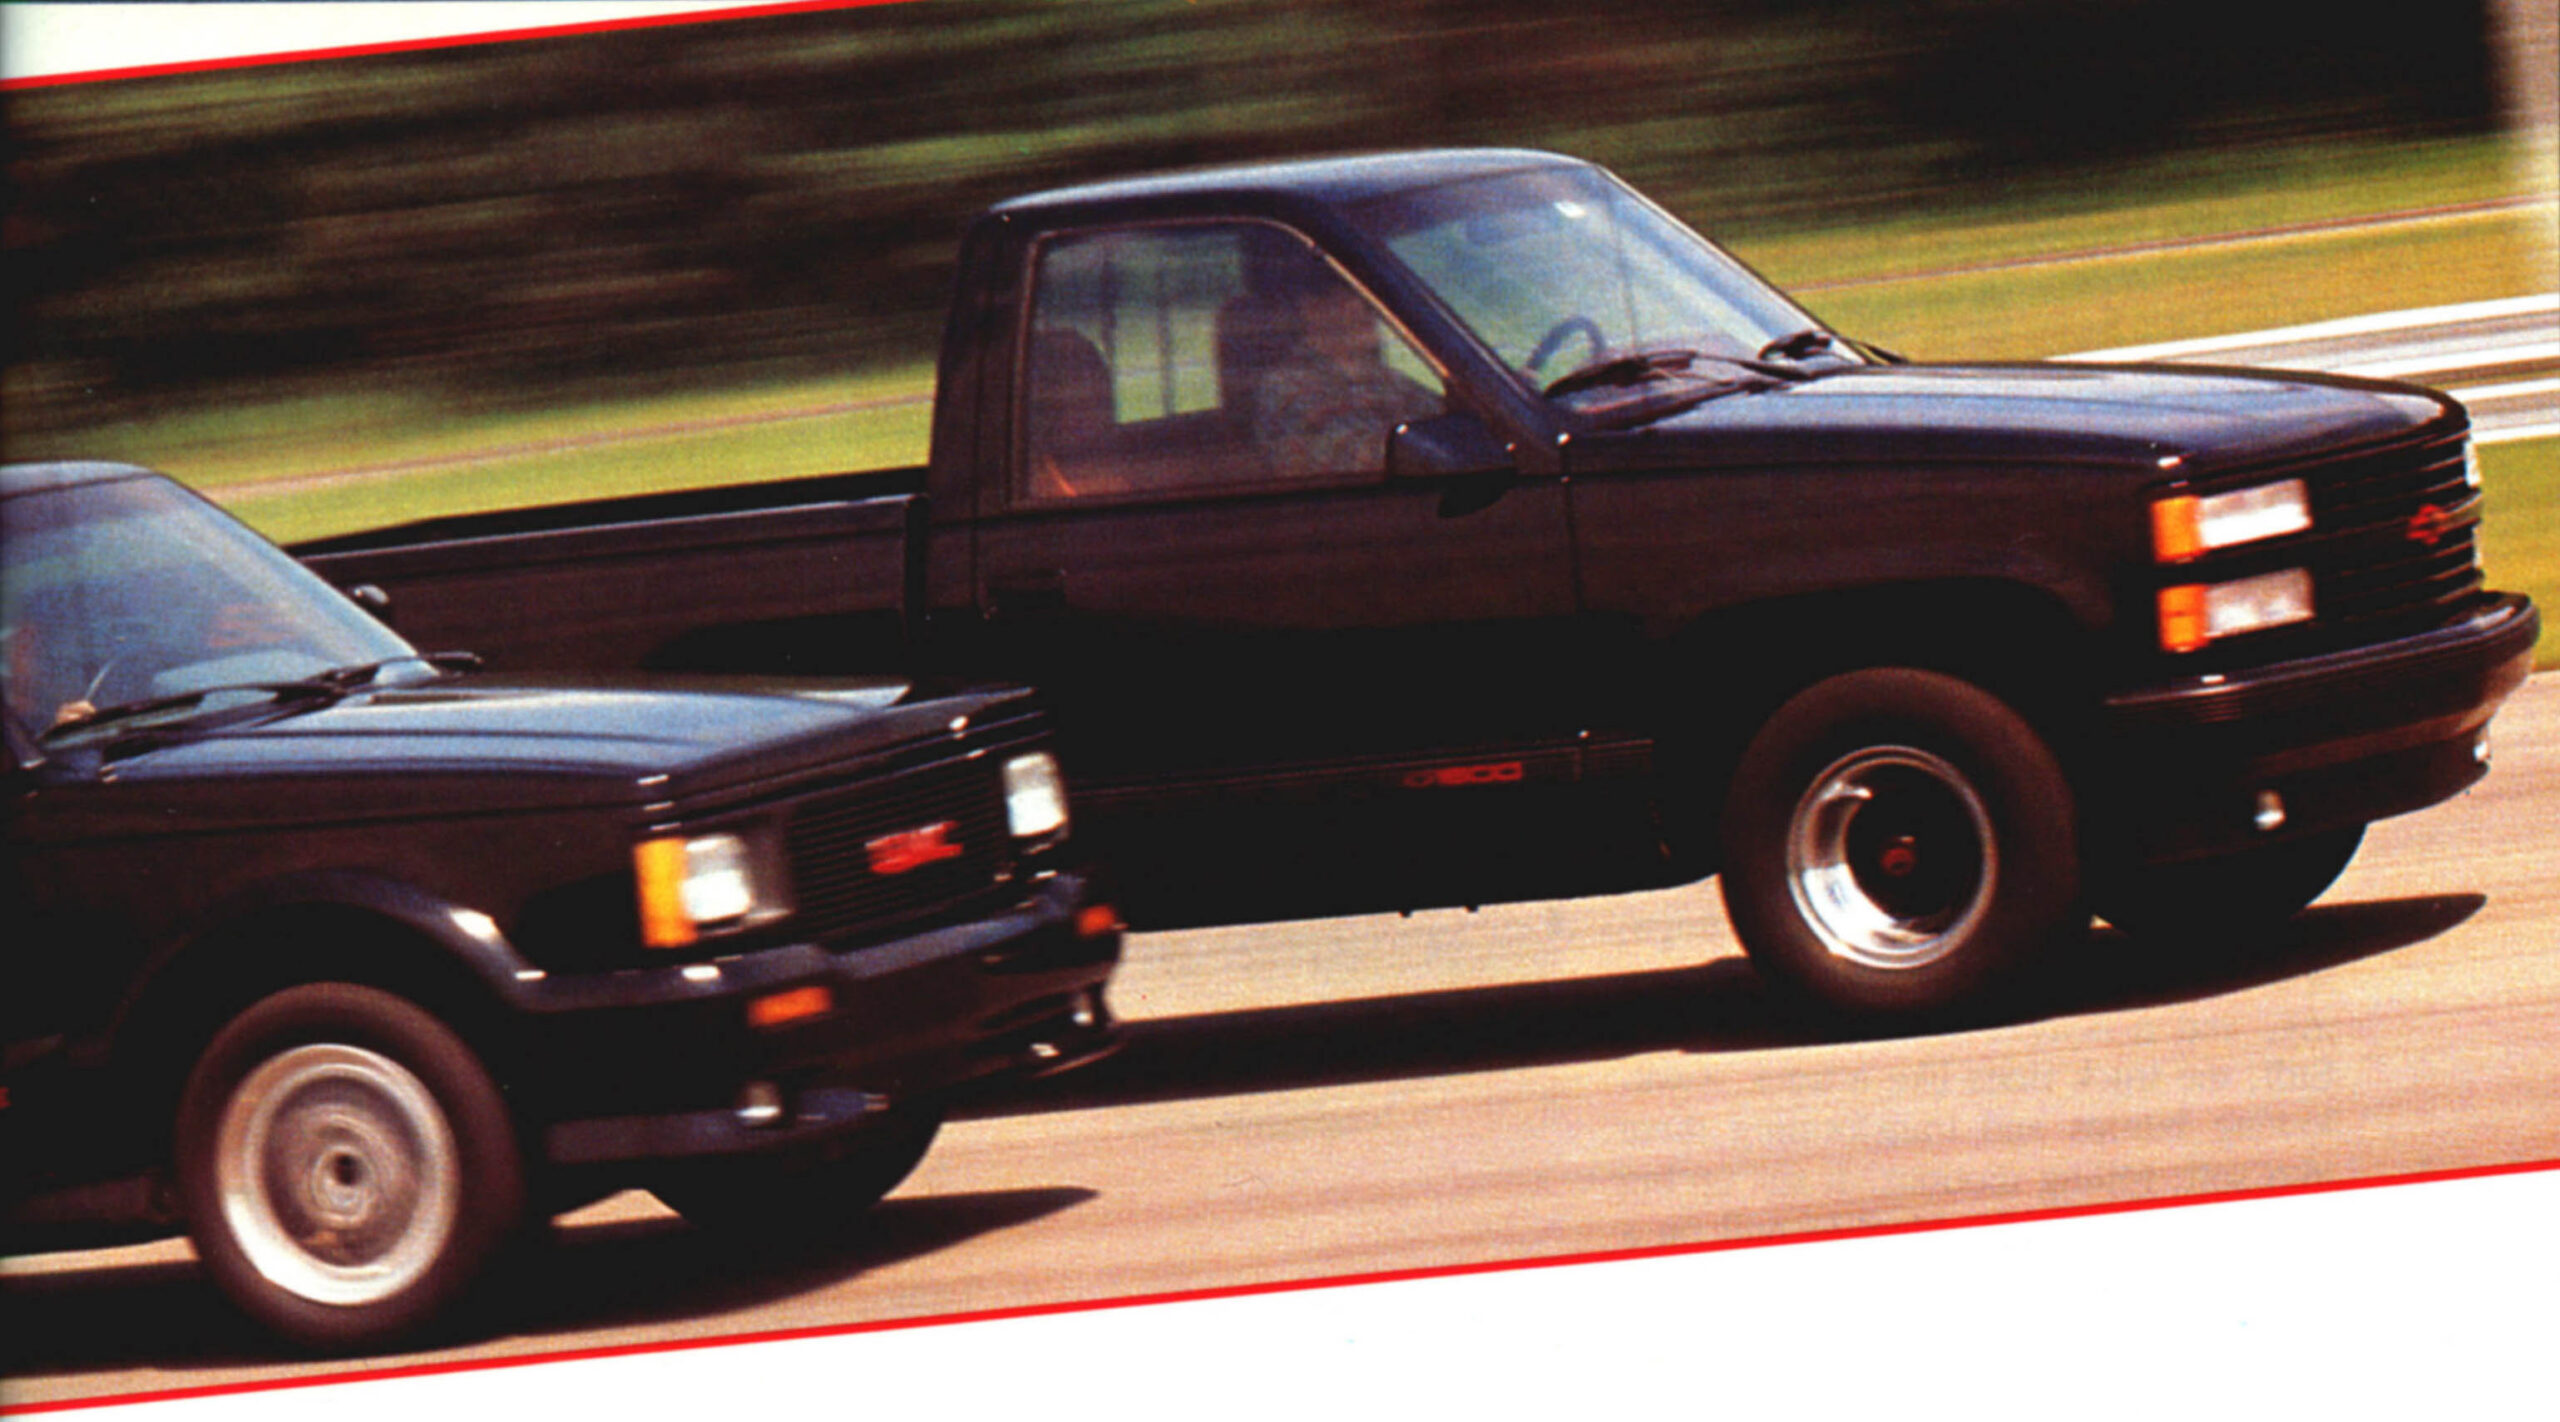 GMC Syclone and Chevrolet 454 SS